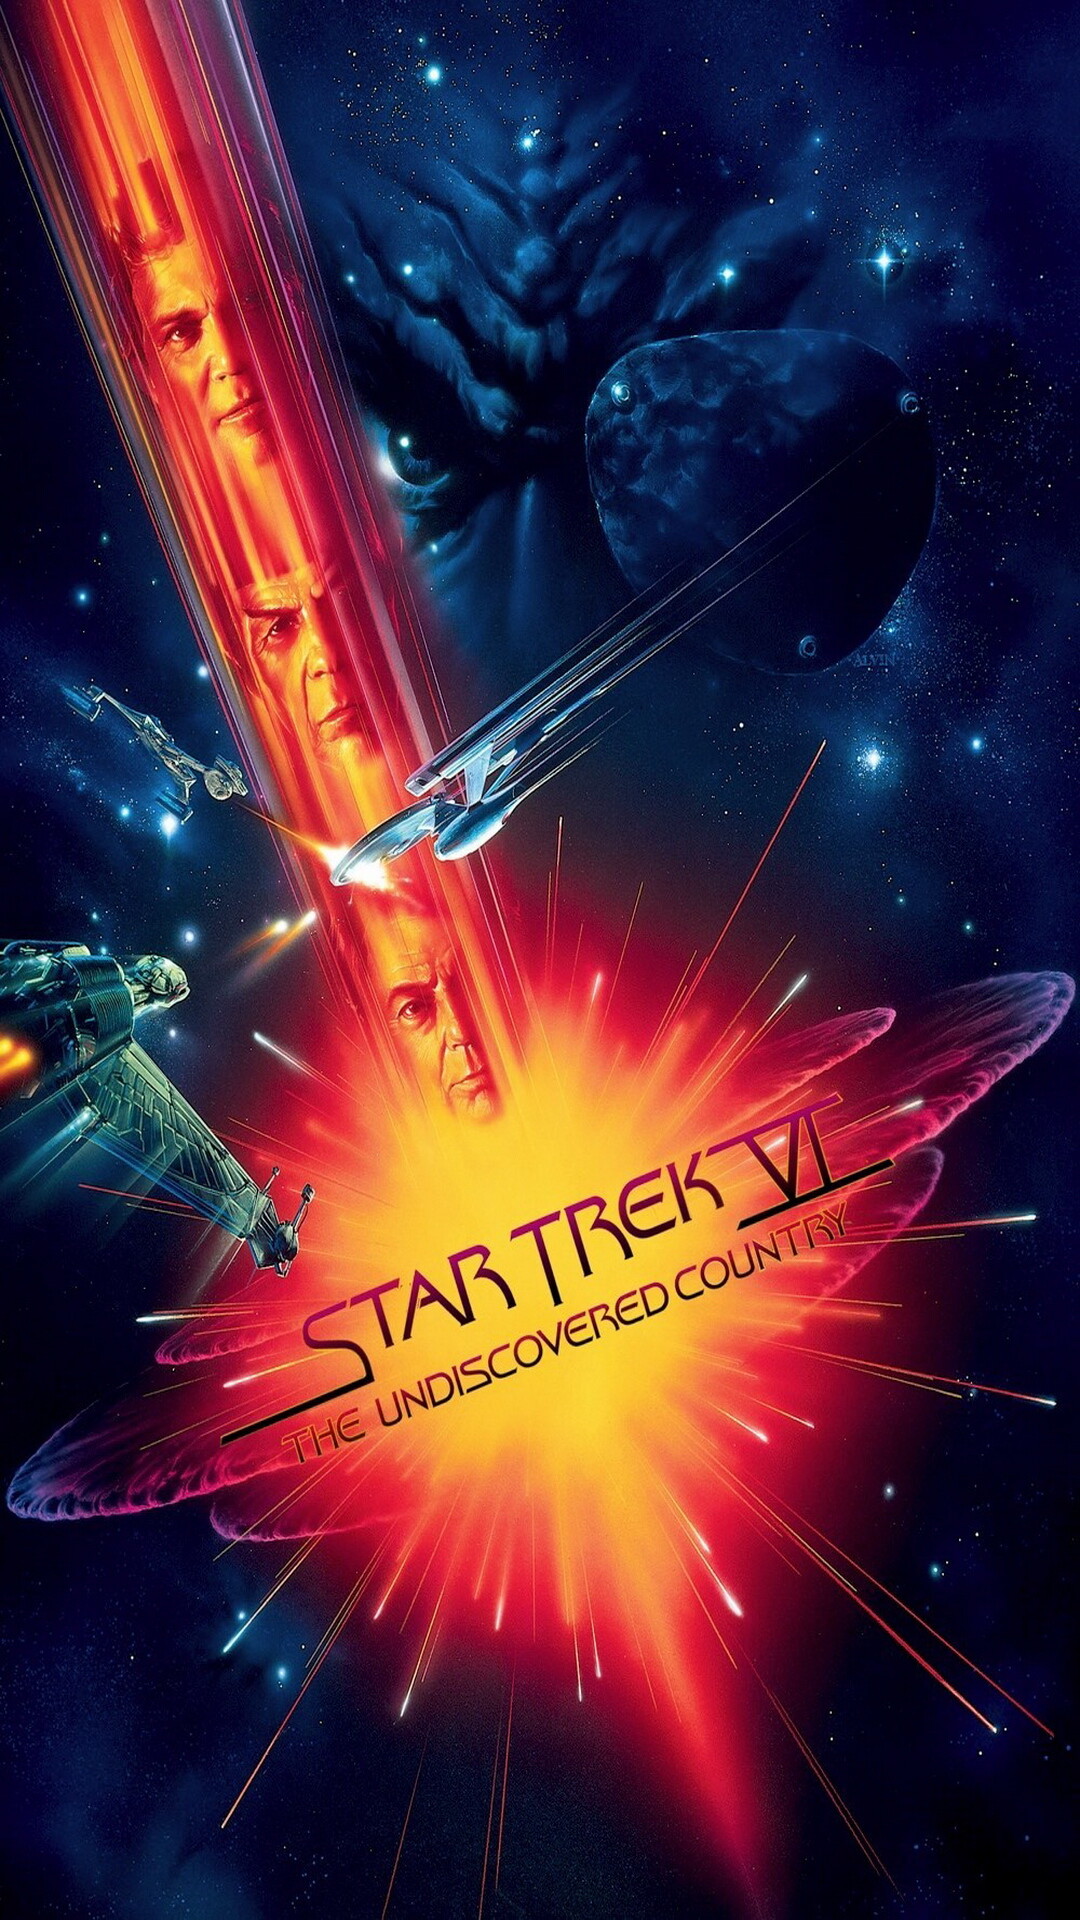 Star Trek: Star Trek VI: The Undiscovered Country, A 1991 American science fiction film directed by Nicholas Meyer. 1080x1920 Full HD Background.